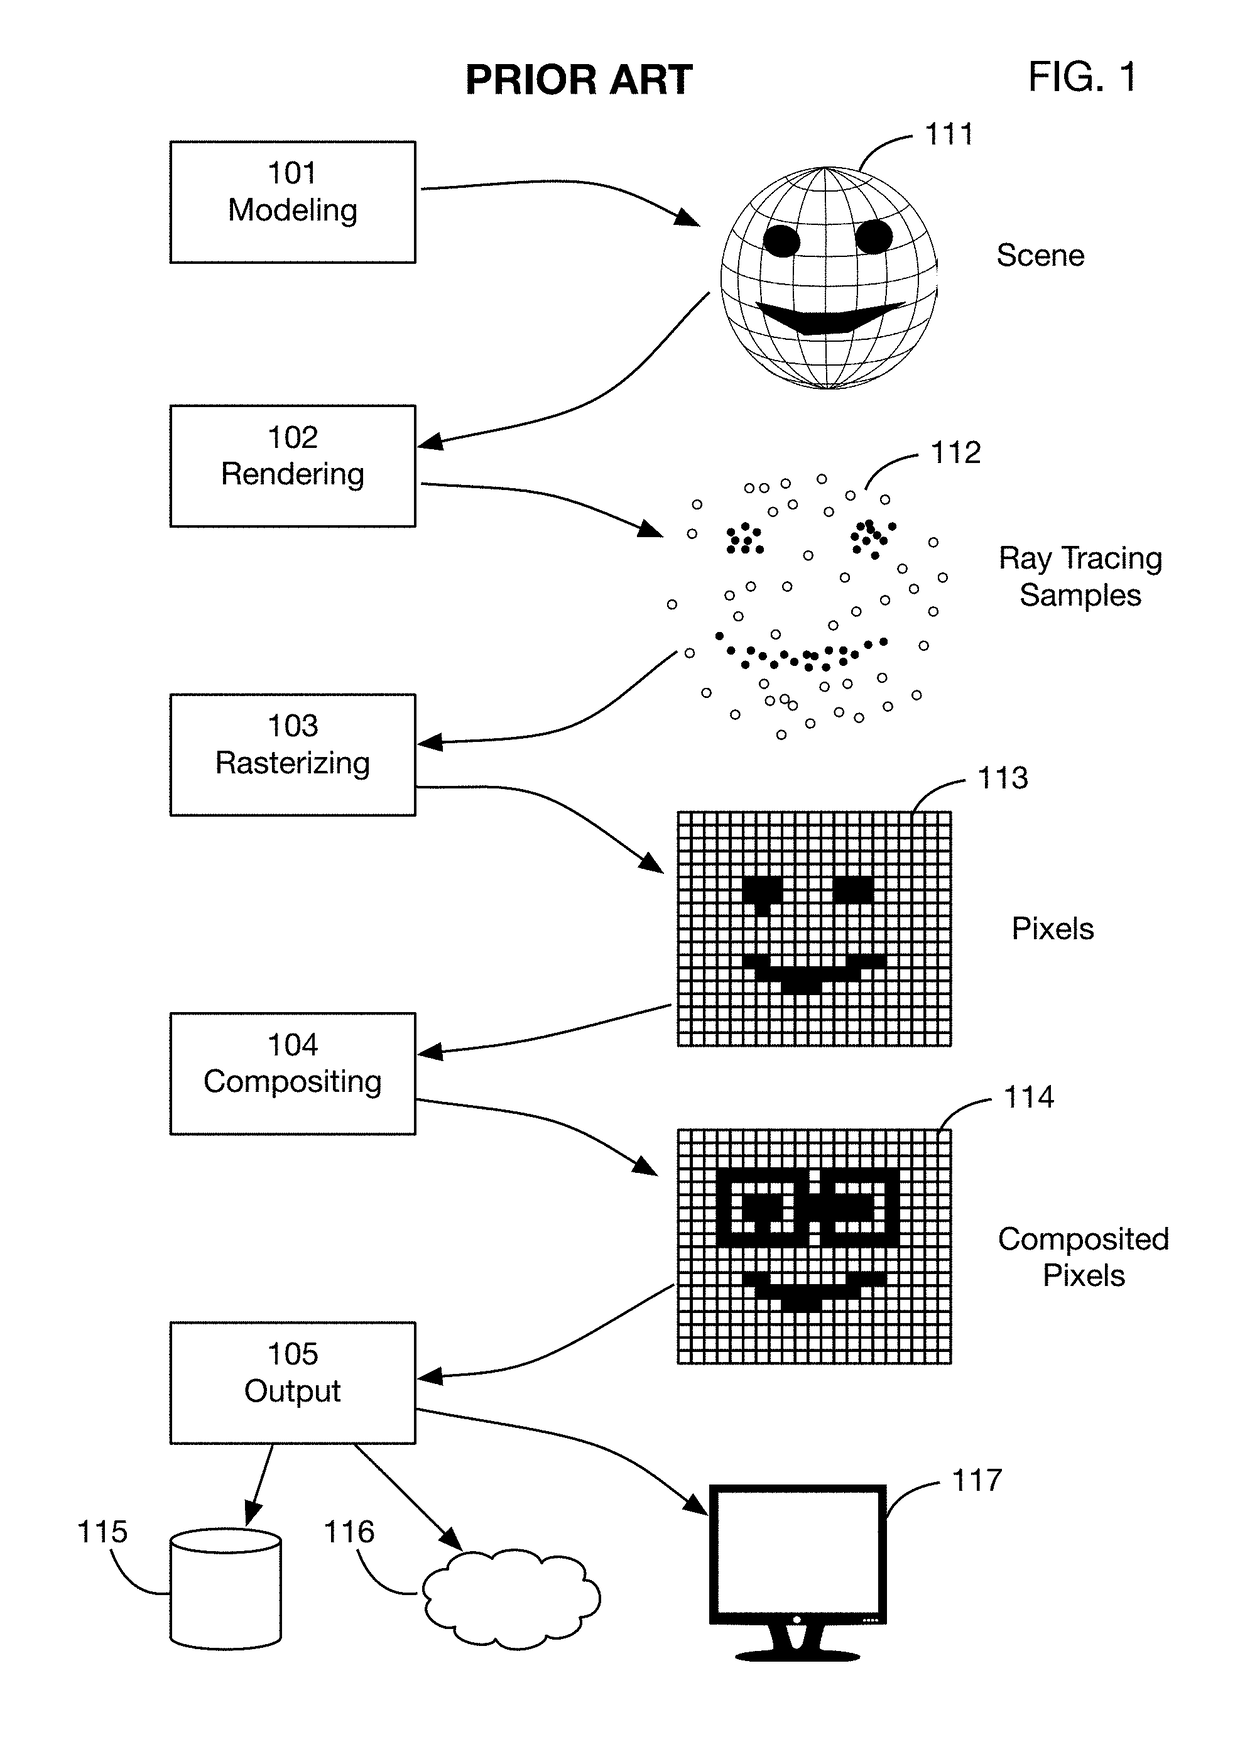 Method of modifying ray tracing samples after rendering and before rasterizing